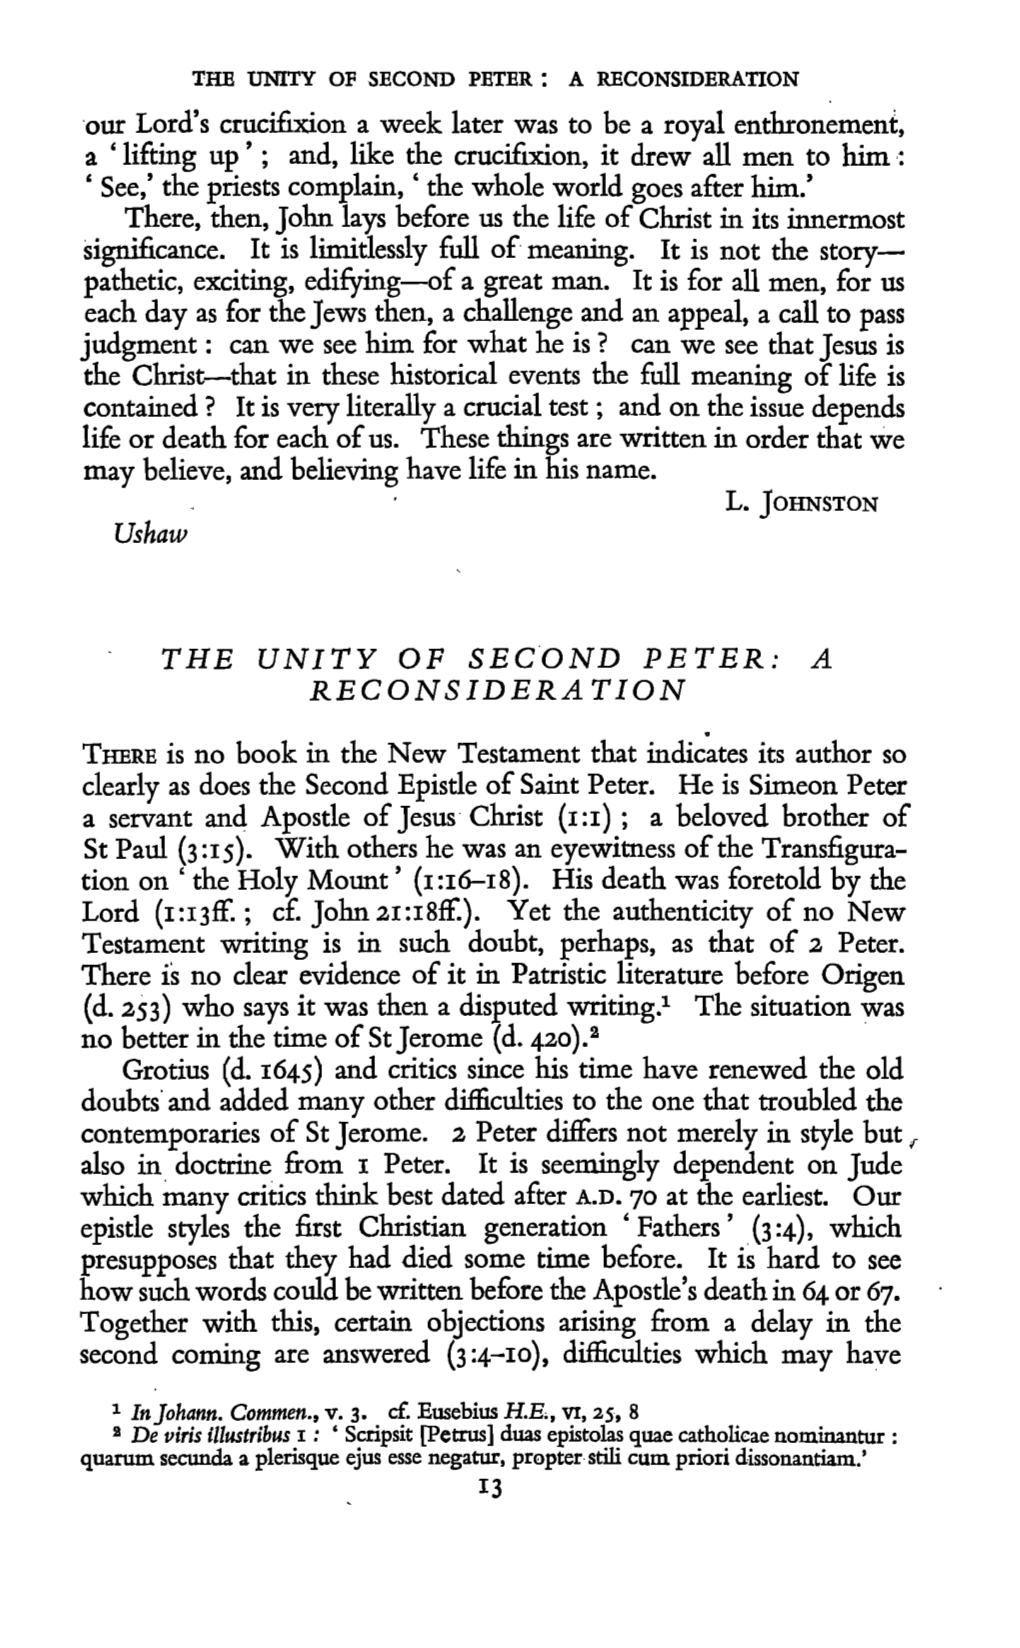 Ushaw the UNITY of SECOND PETER